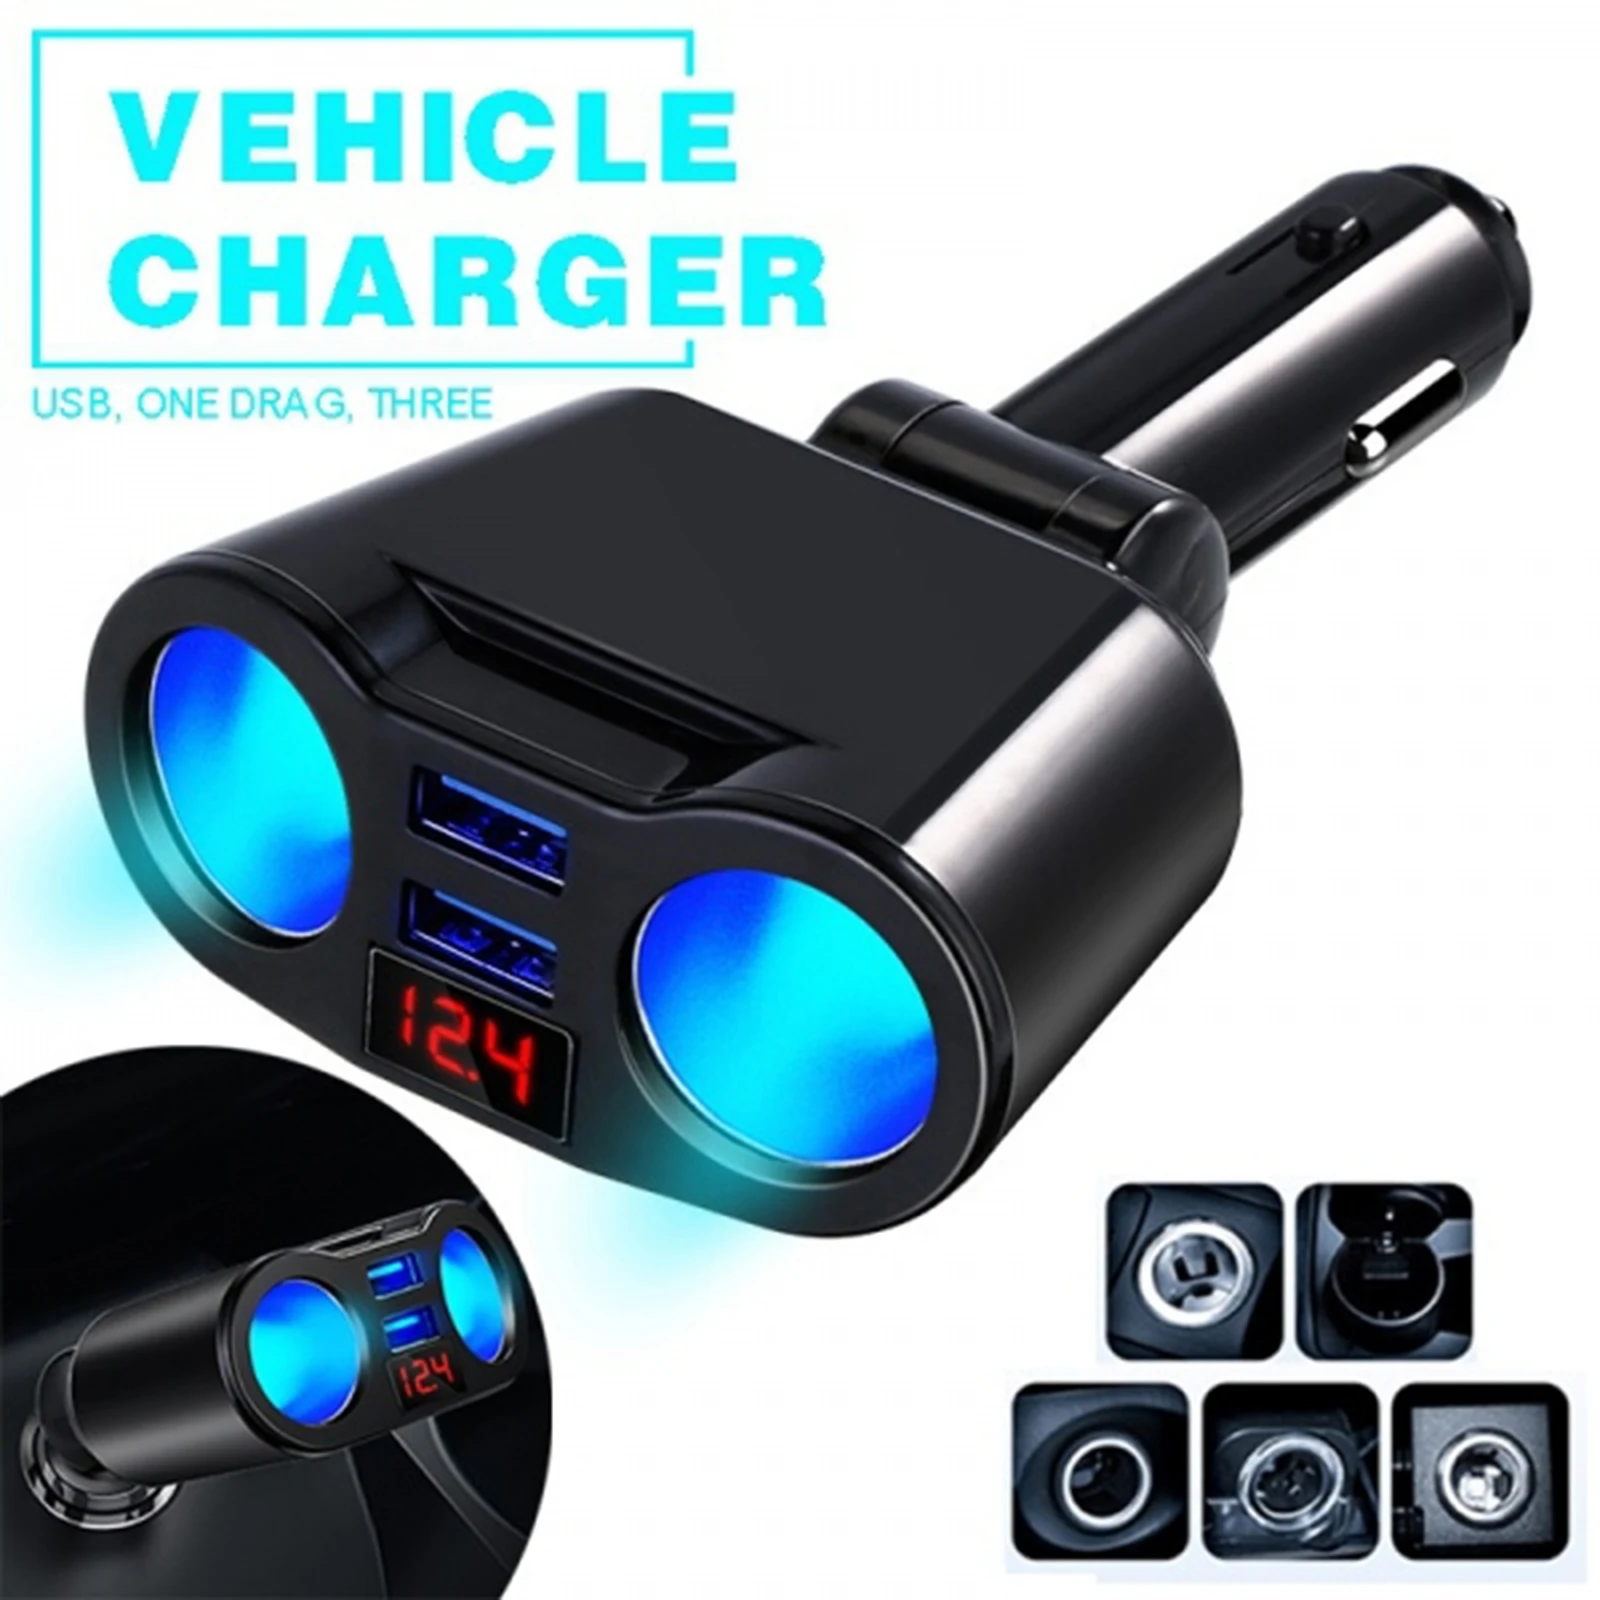 ABS DC 12V Car Cigarette Lighter Adapter Charger Rotatable IC Control Protection Accessories Parts for Smartphones MP3 Cameras